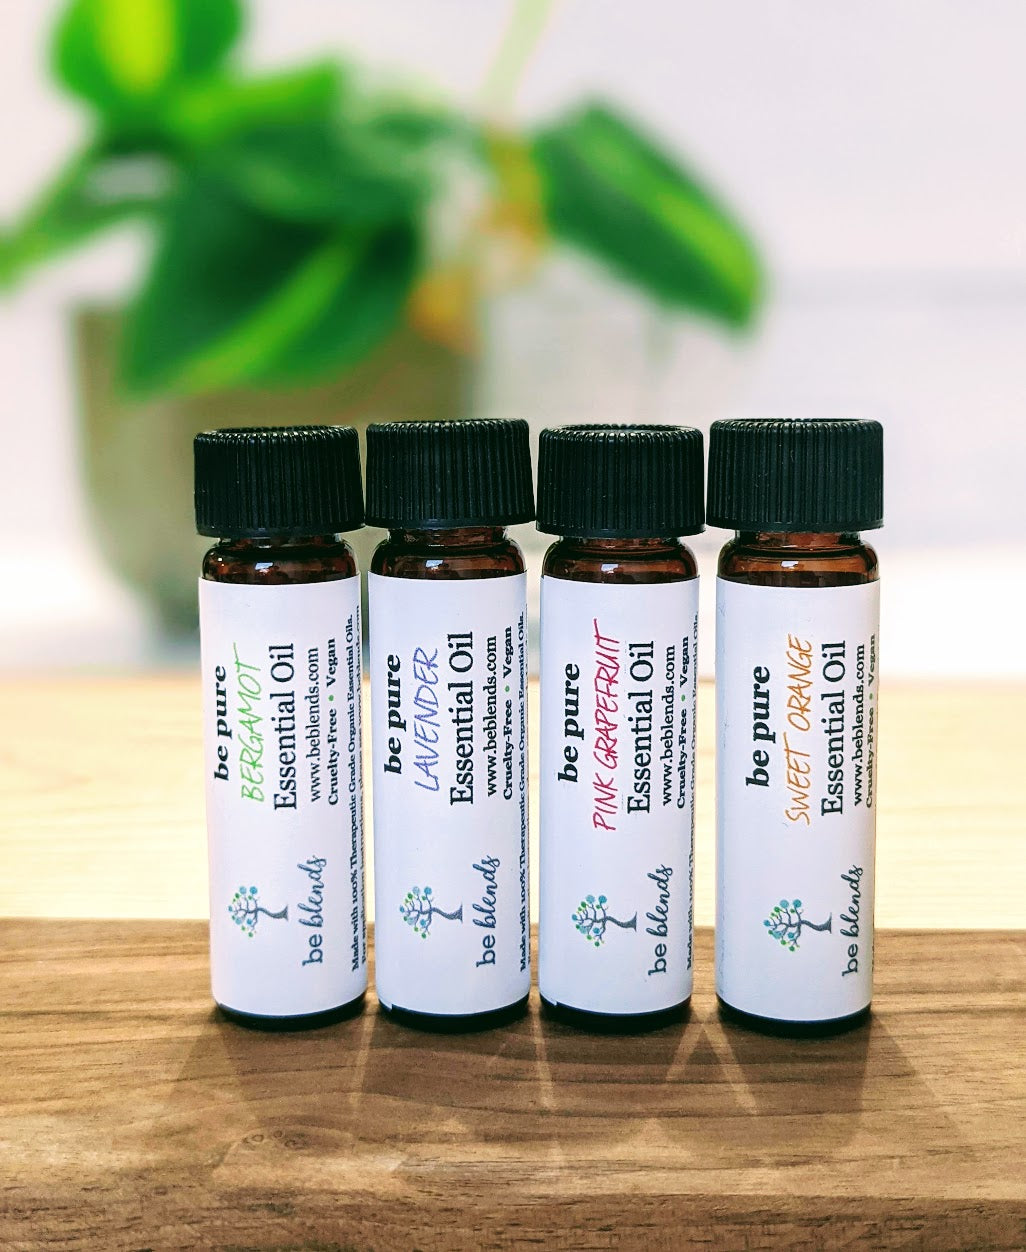 4Pack Essential Oils Sets Organic Plant & Natural 100% Pure